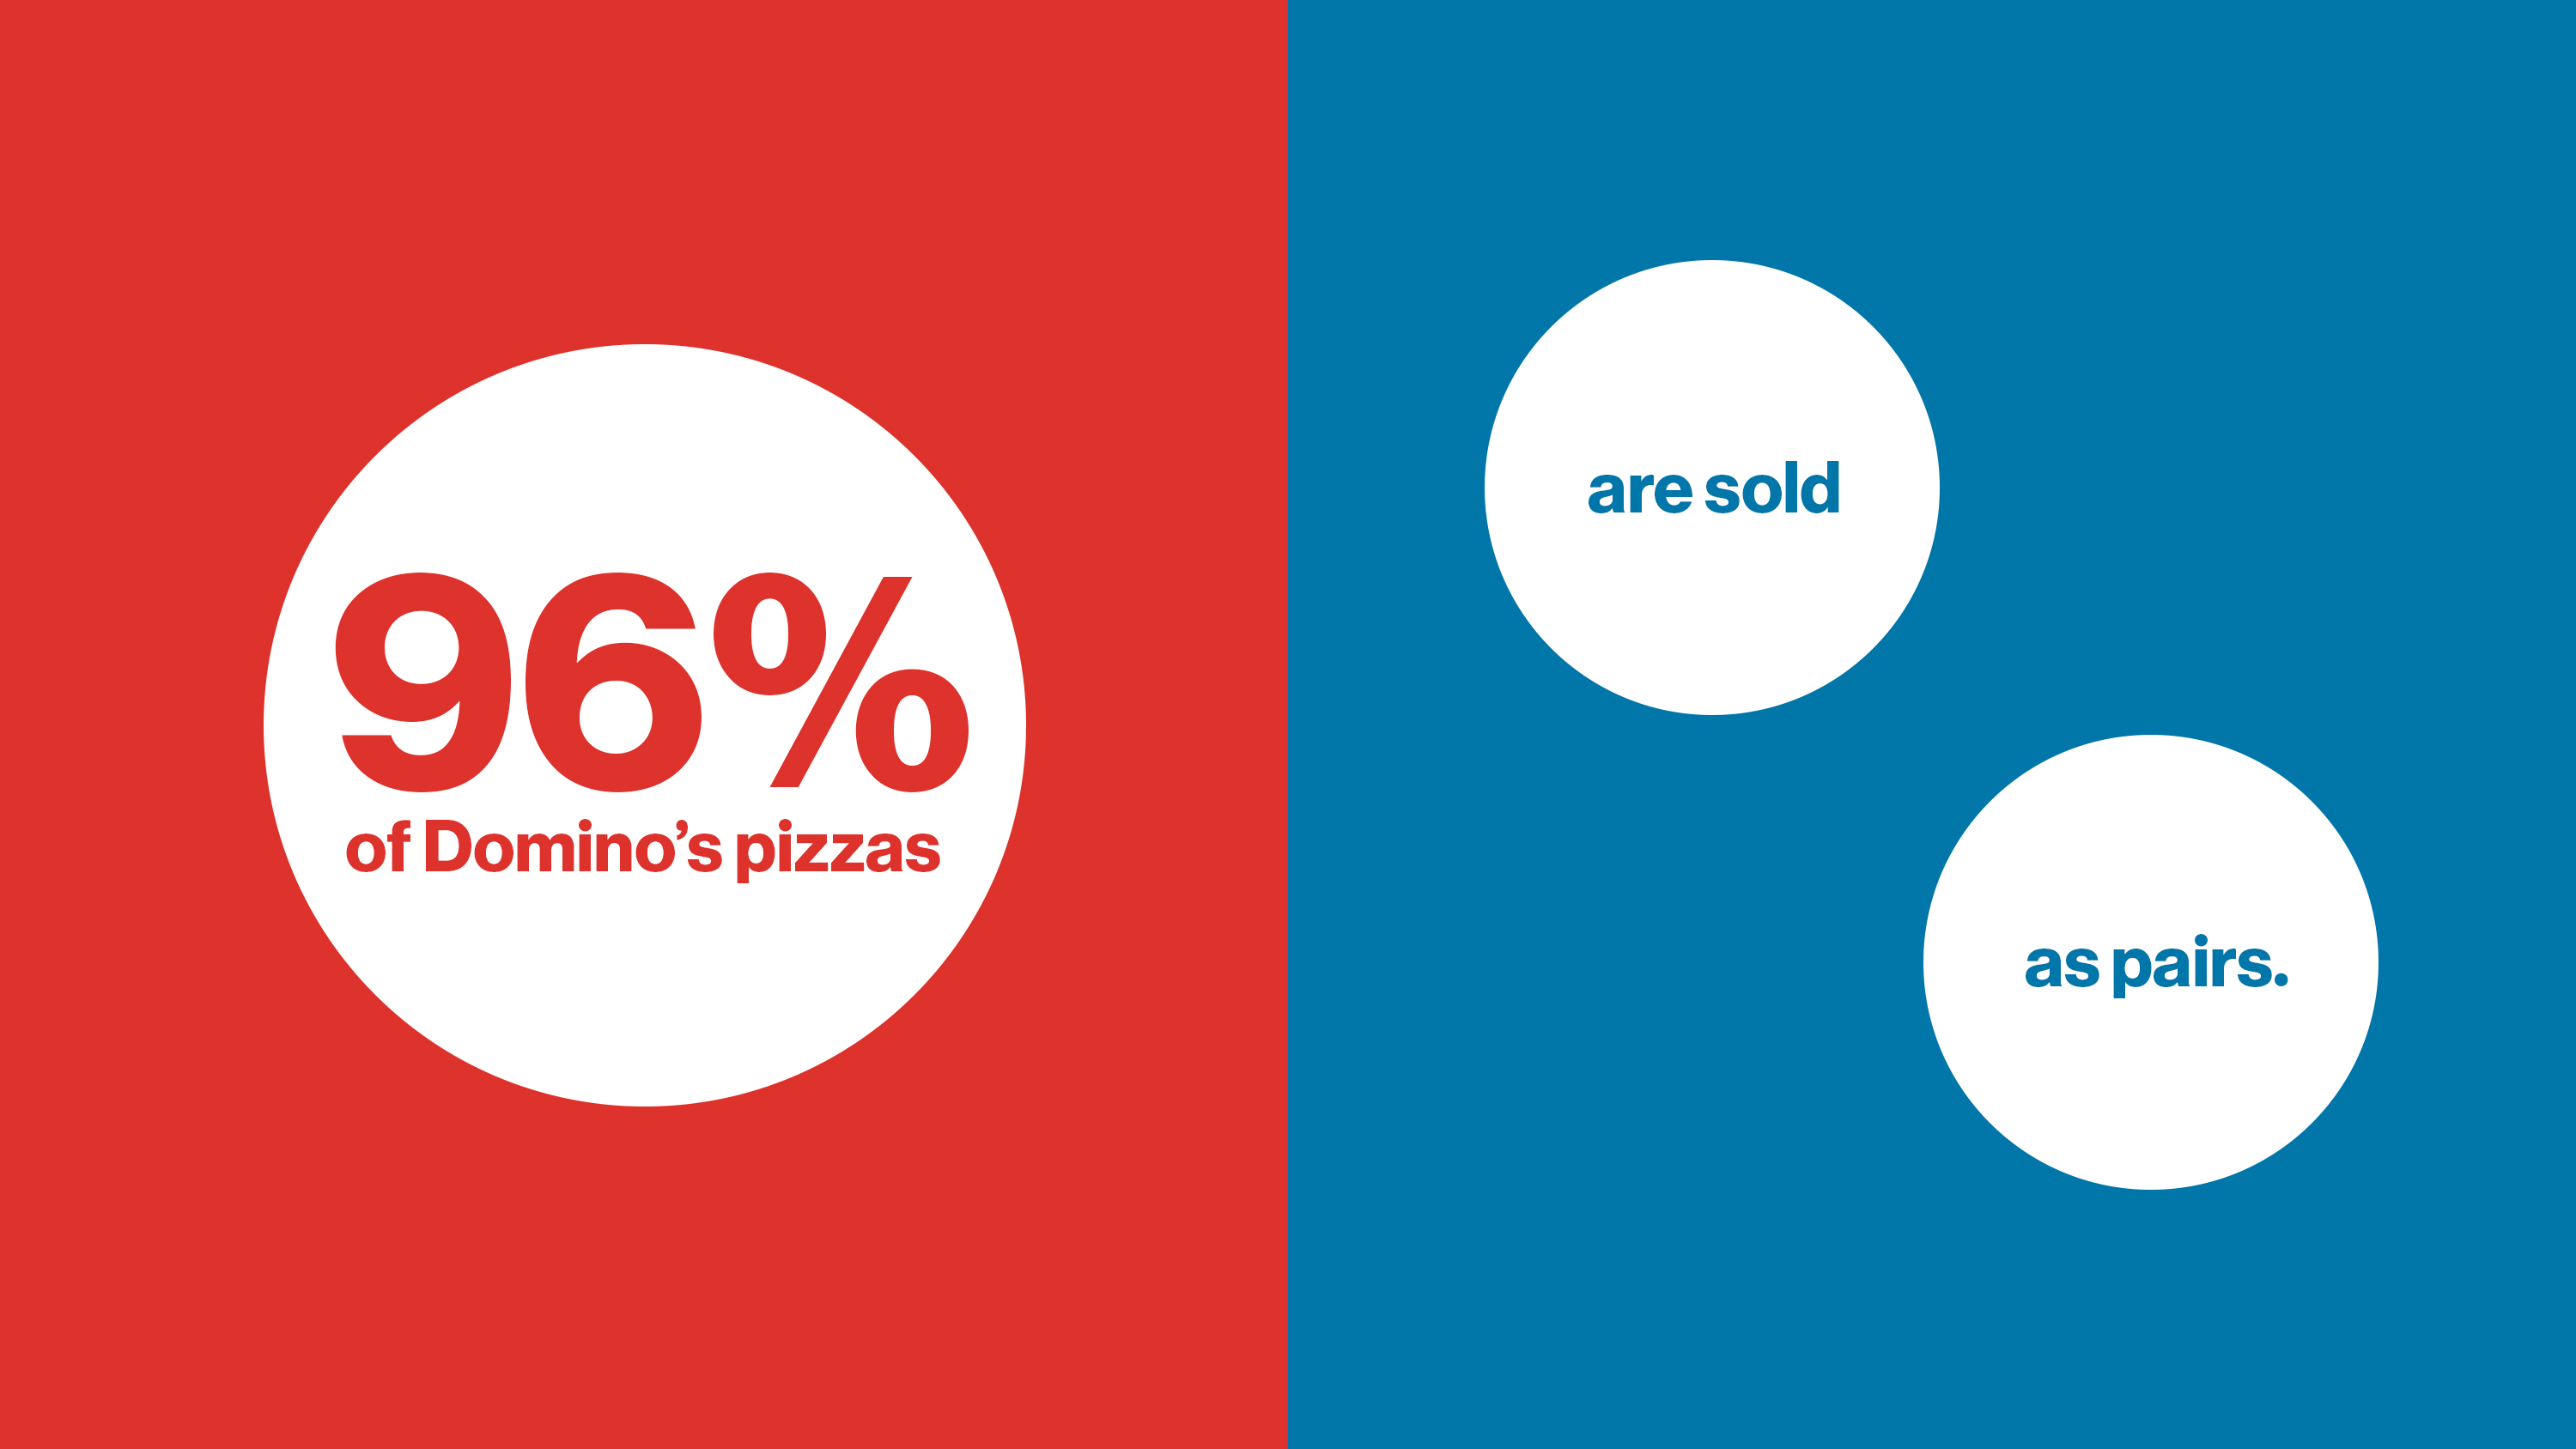 JKR redesigns Domino's packaging to highlight two-pizza deals - Design Week